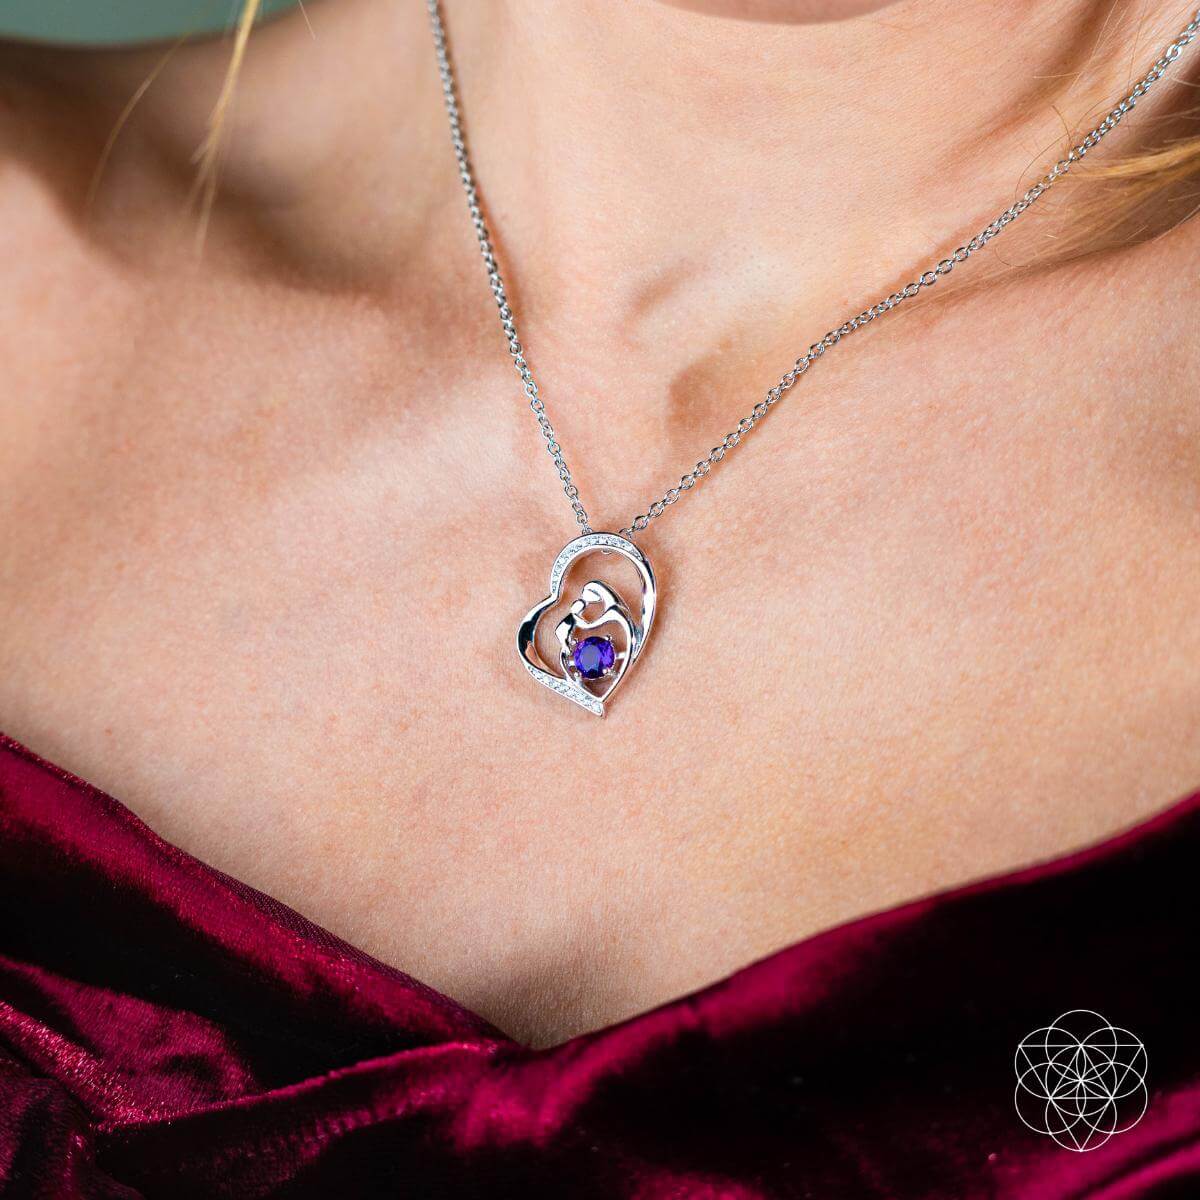 Unbreakable Bond - Mother &amp; Child Crystal Heart Pendant with Amethyst